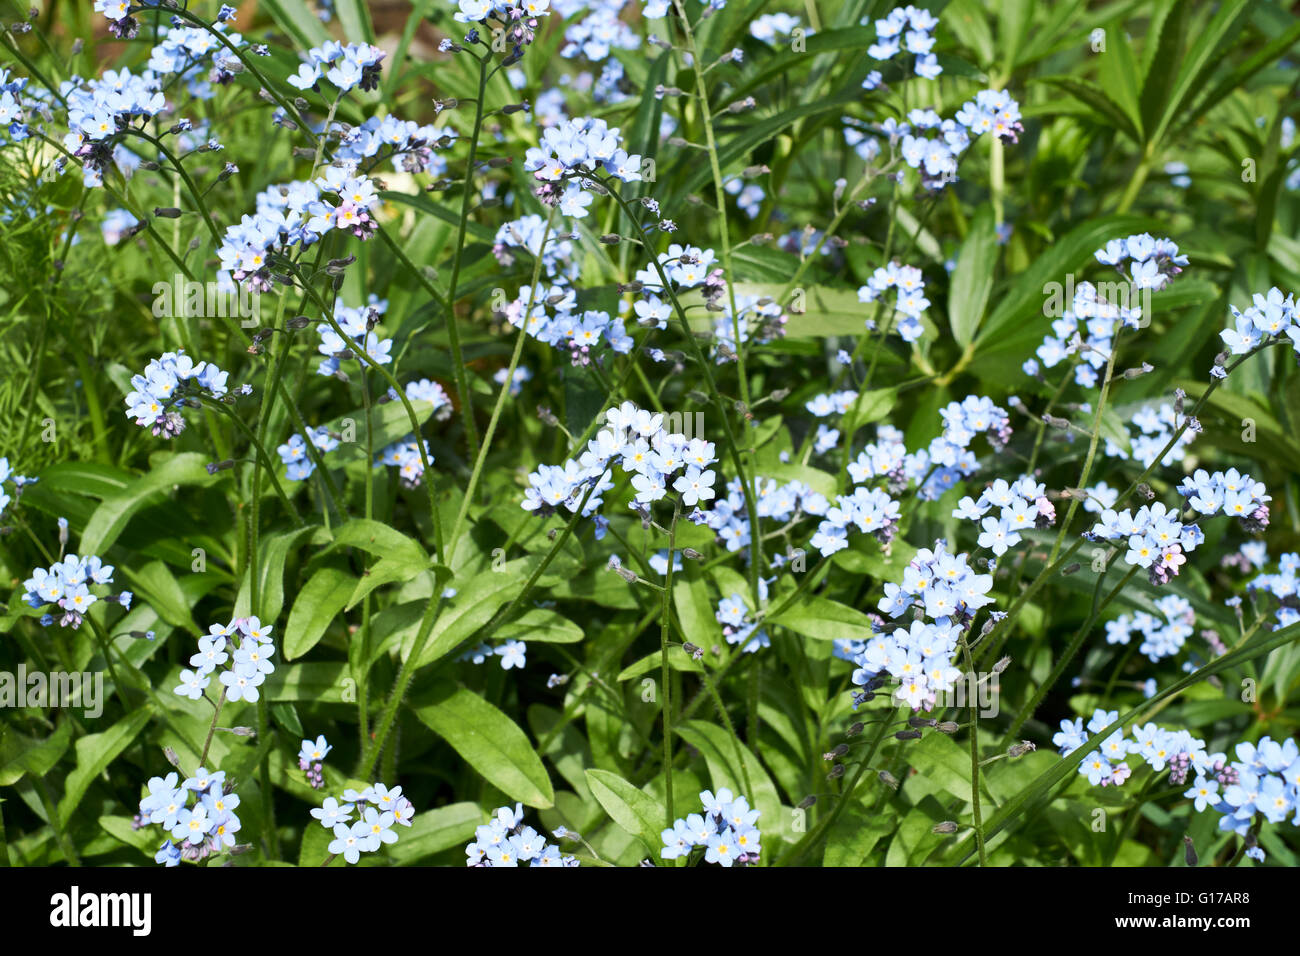 An English Country Garden flowerbed densely planted with Forget-me-not (Myosotis). Spring. UK Stock Photo